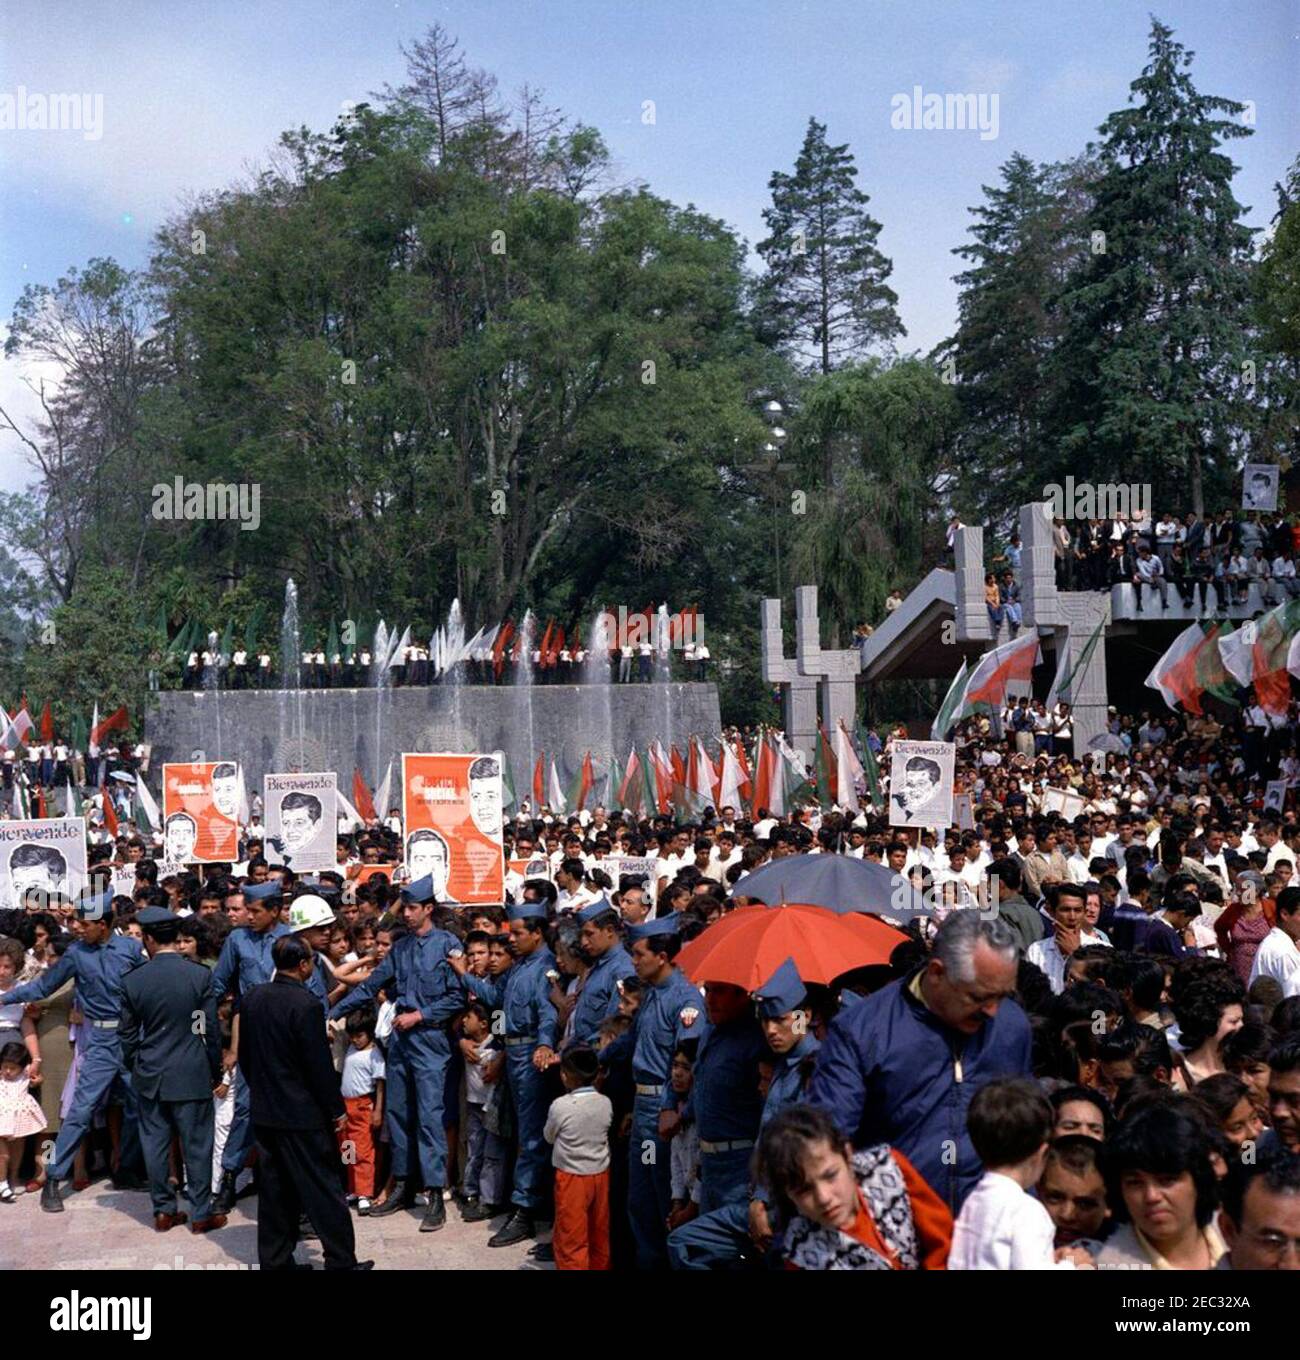 Trip to Mexico: Tour and address at the Independencia Housing Project, 9:35AM. Spectators gather to see President John F. Kennedy during his visit to the Unidad Independencia (Independencia Housing Project) in Mexico City, Mexico. Stock Photo